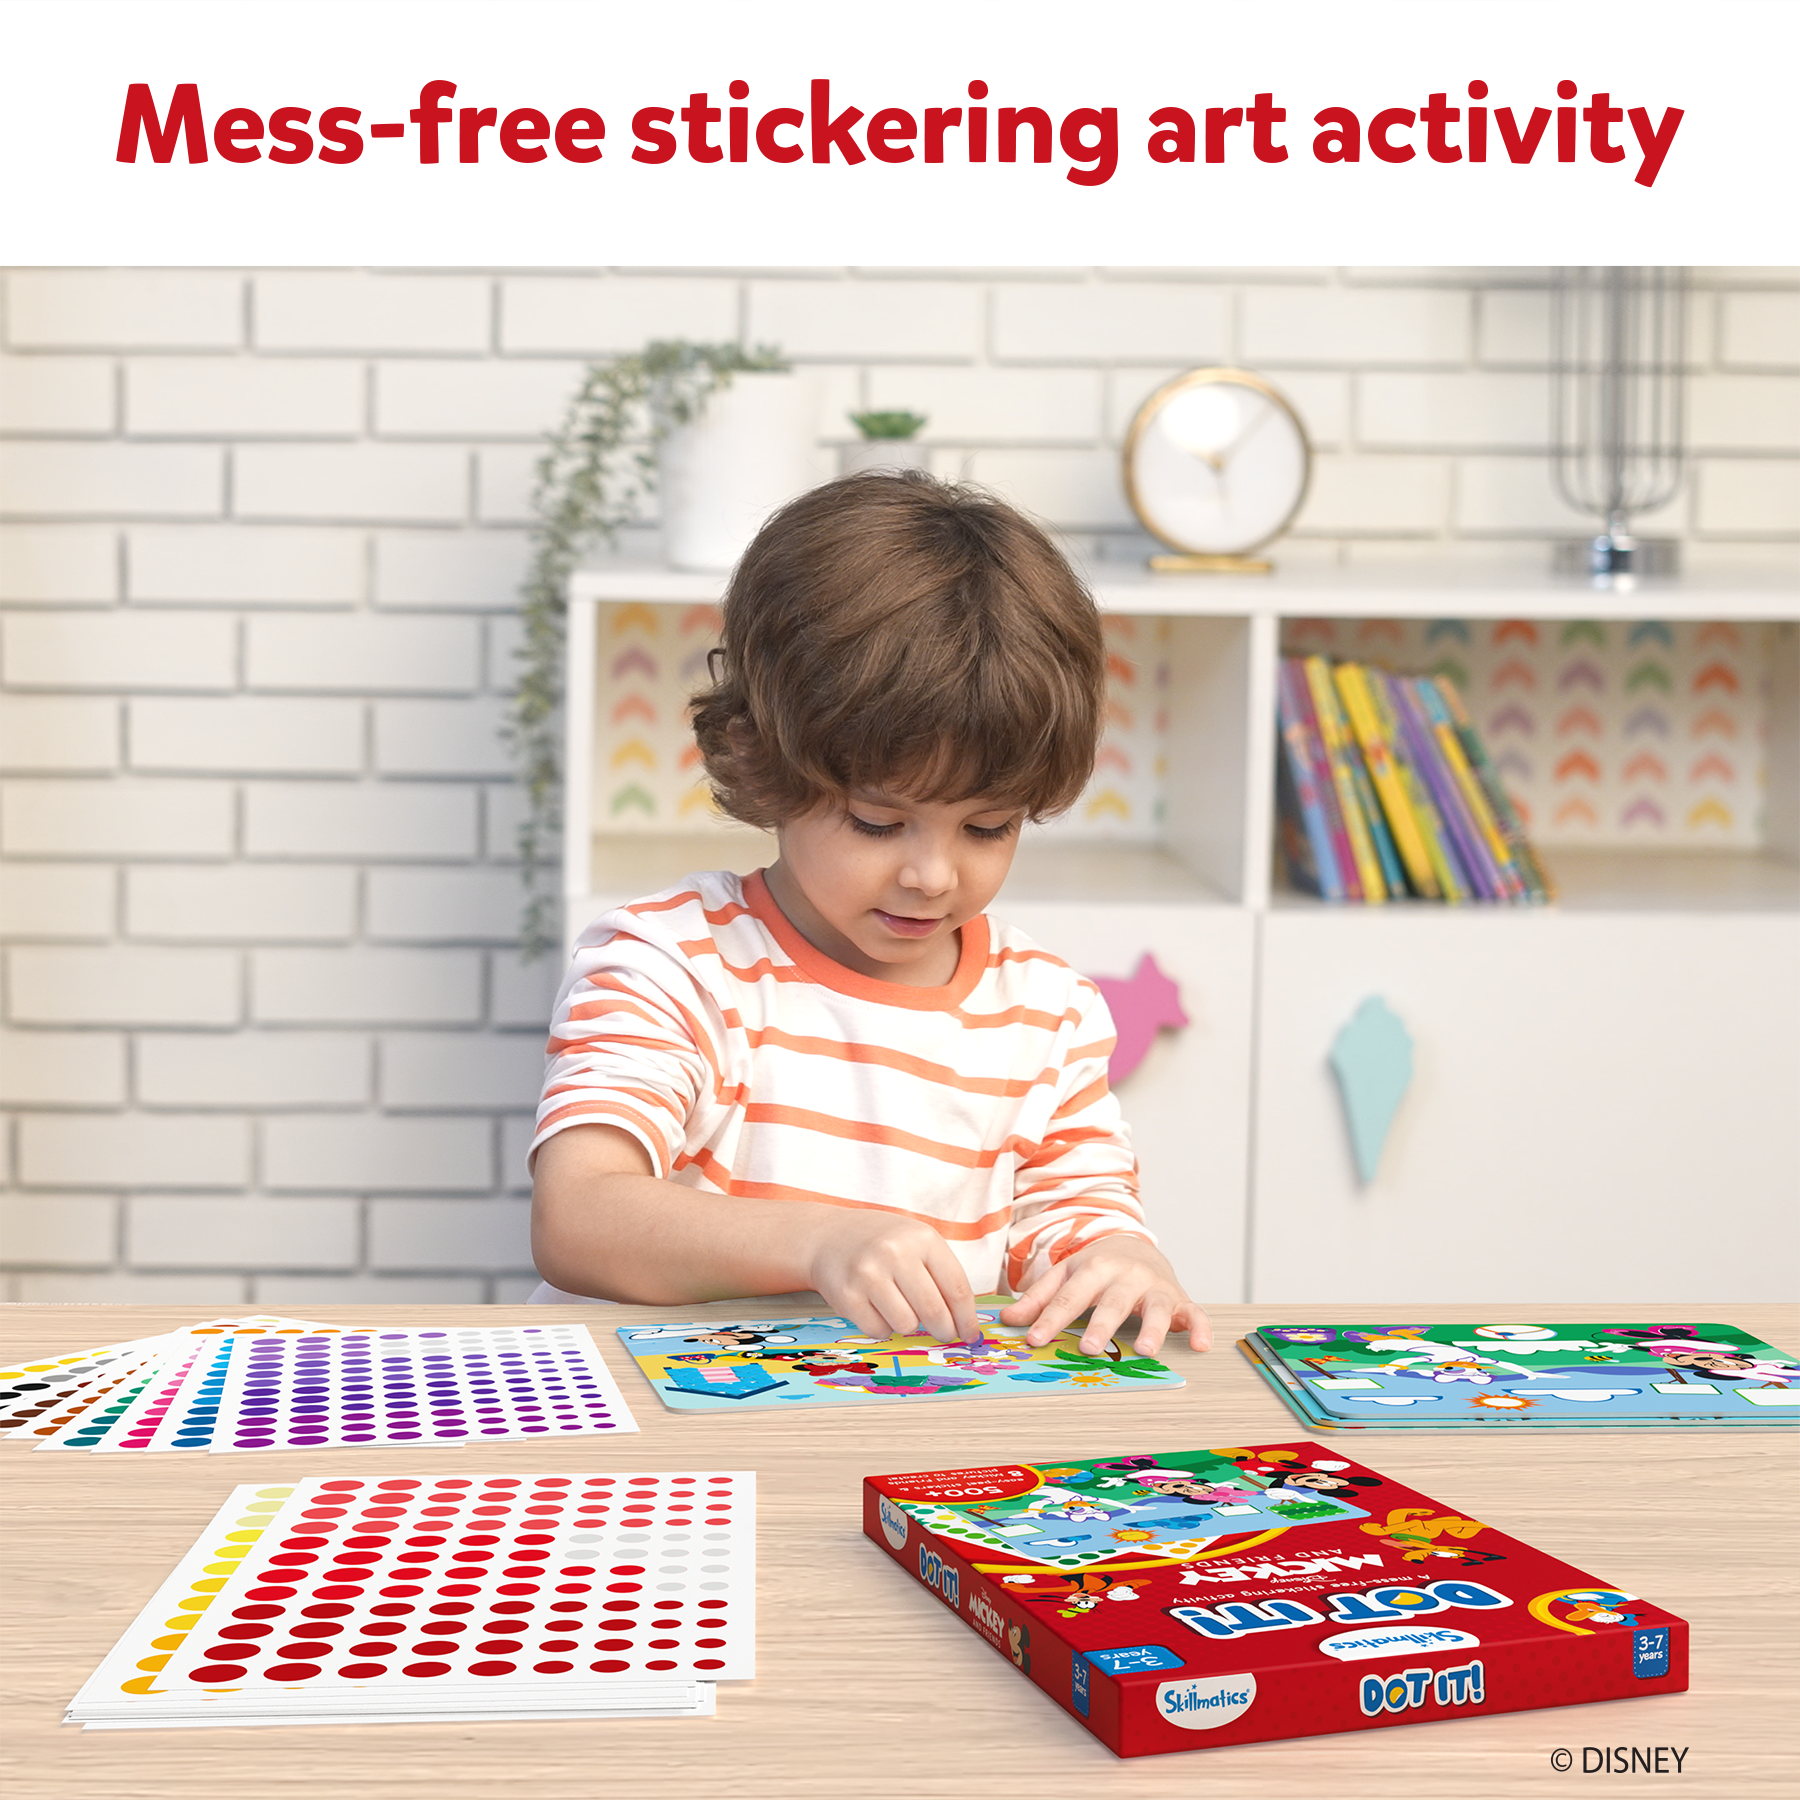 Skillmatics Art Activity - Dot It Mickey and Friends, Mess-Free Sticker Art for Kids, Craft Kits, DIY Activity, Gifts for Boys & Girls Ages 3, 4, 5, 6, 7, Travel Toys for Toddlers